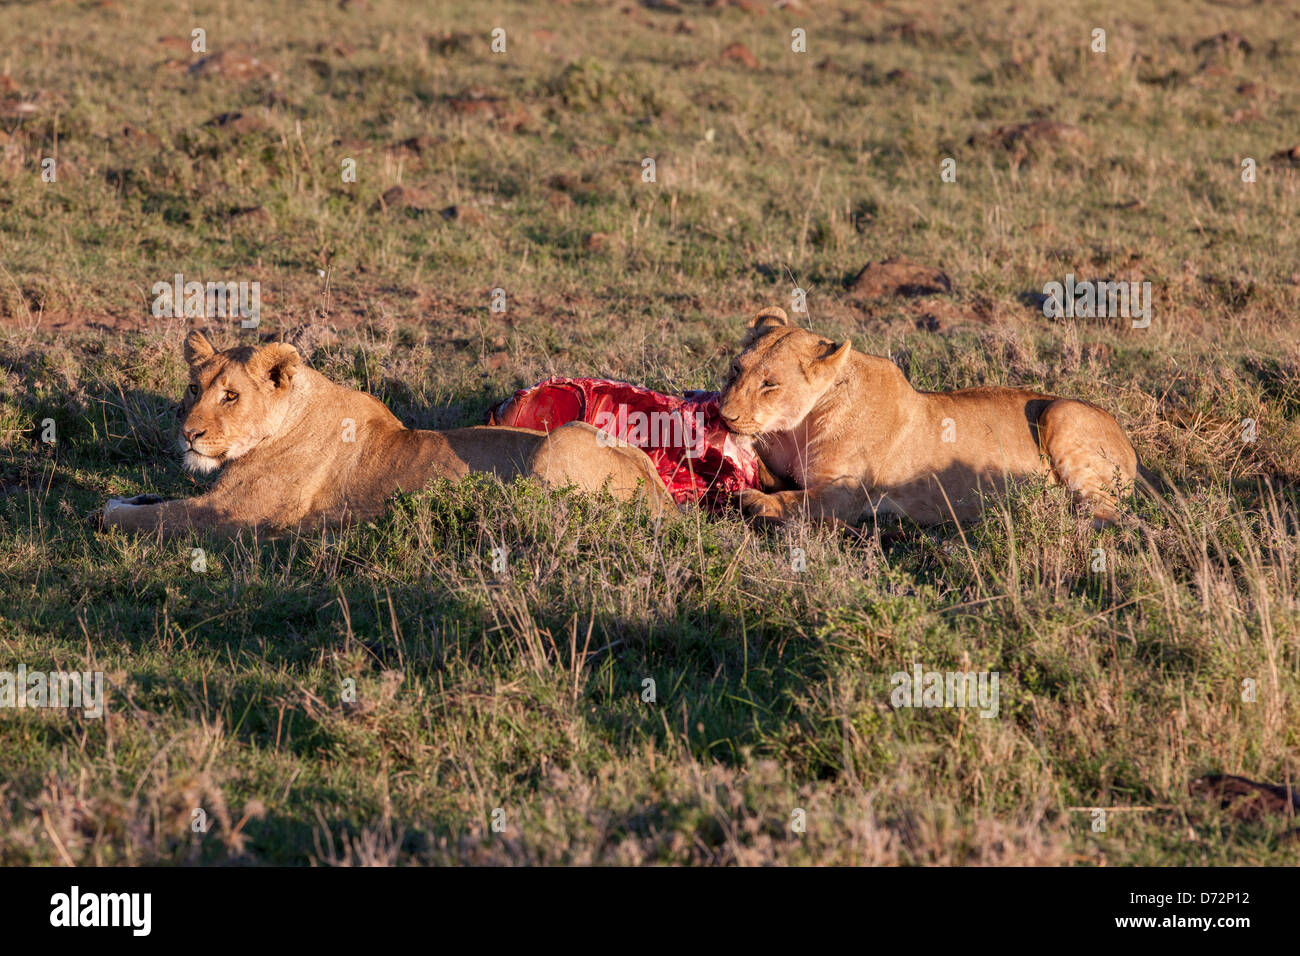 Lions and prey Stock Photo